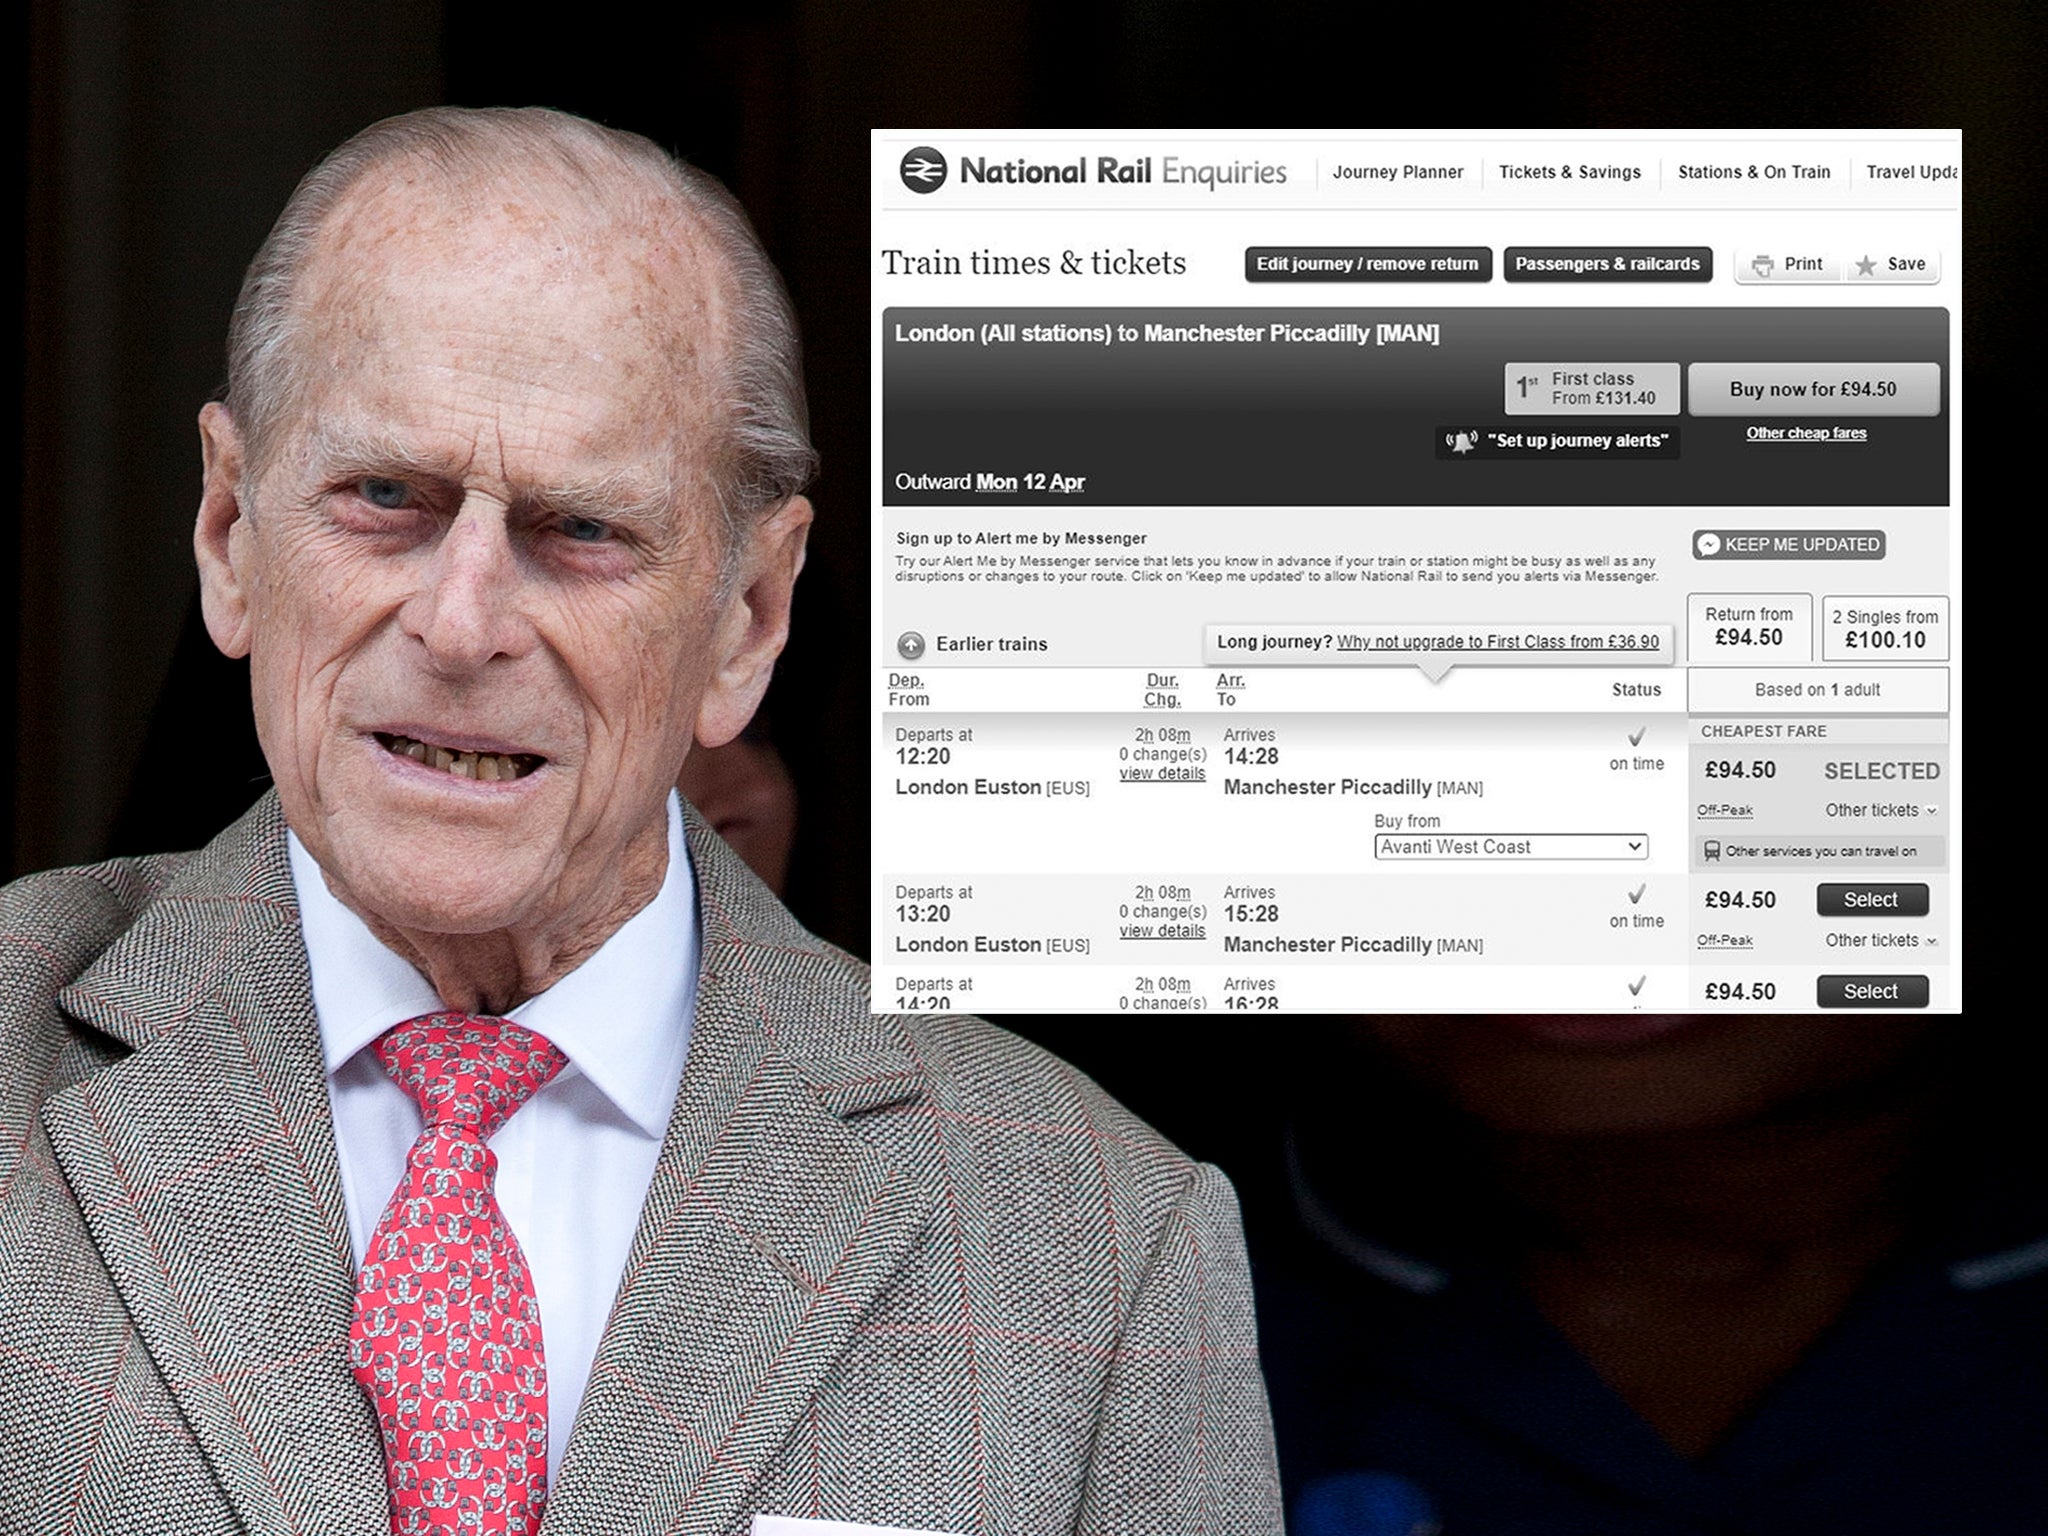 National Rail Enquiries website showing respect for Prince Philip